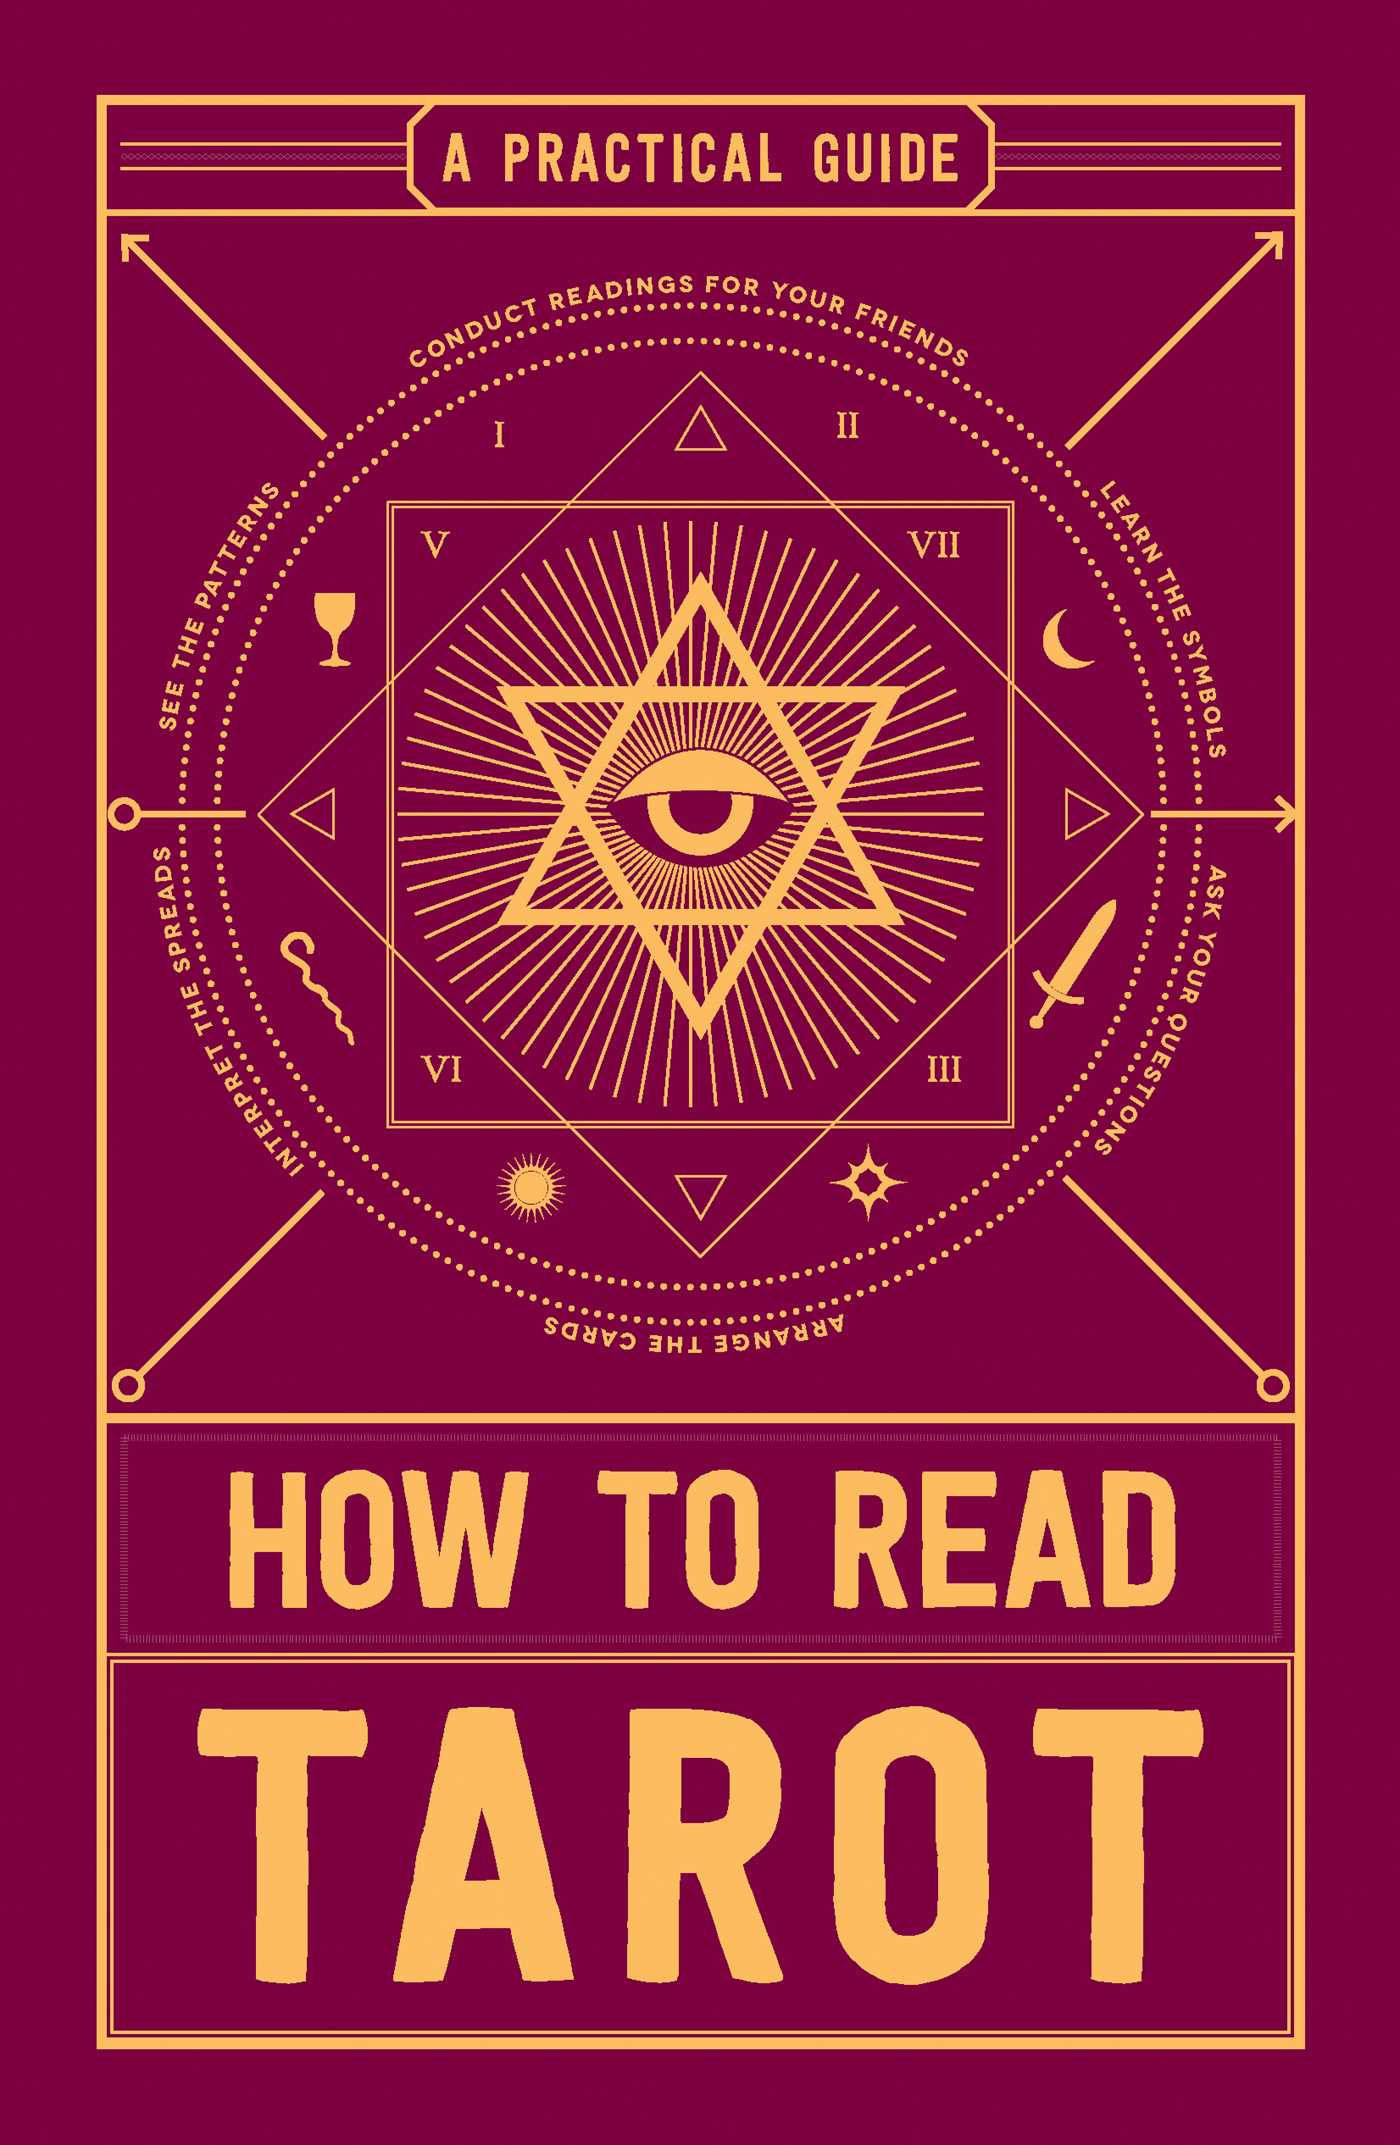 How To Read Tarot; A Practical Guide